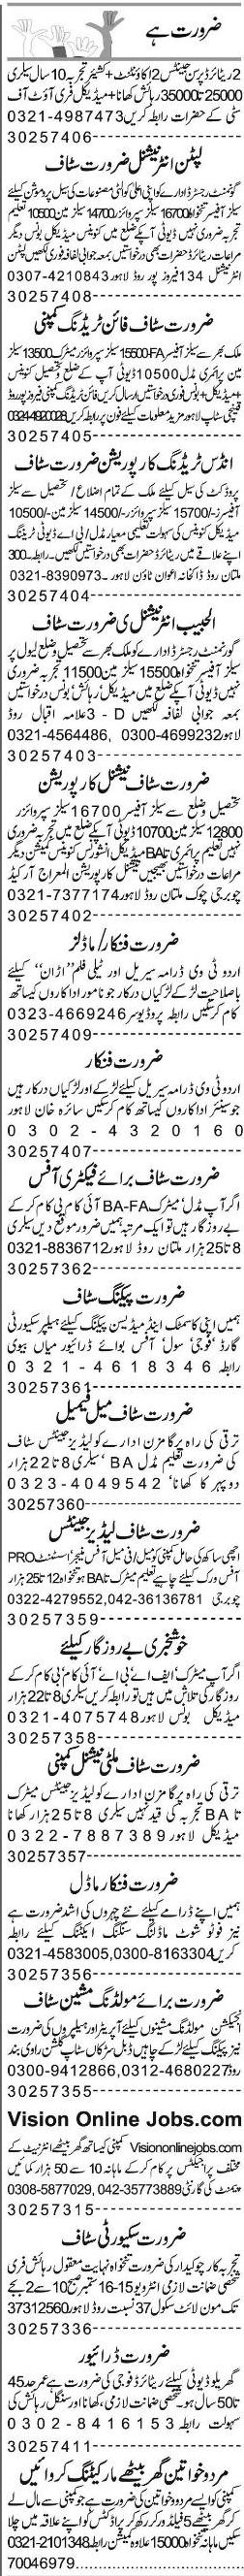 Misc. Jobs in Lahore Classified